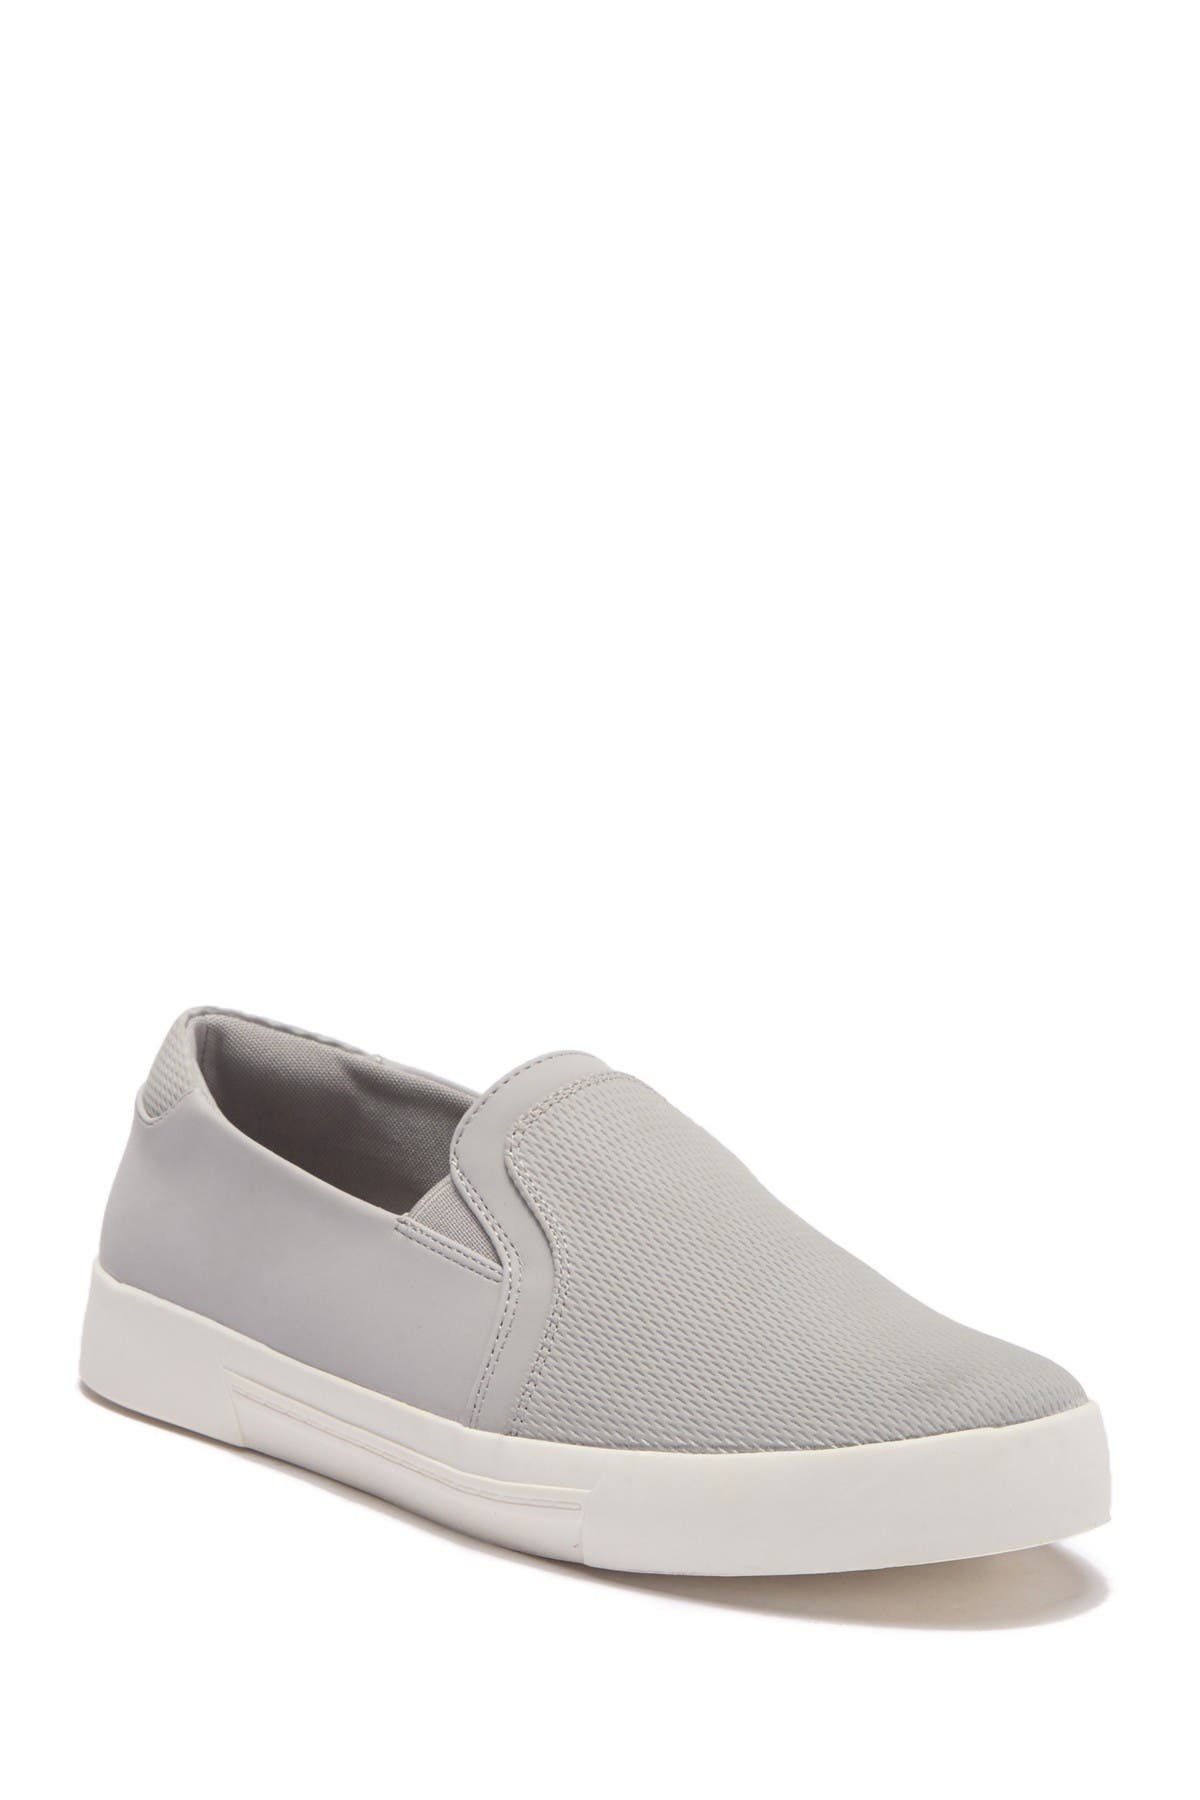 Call It Spring | Northelle Slip-On 